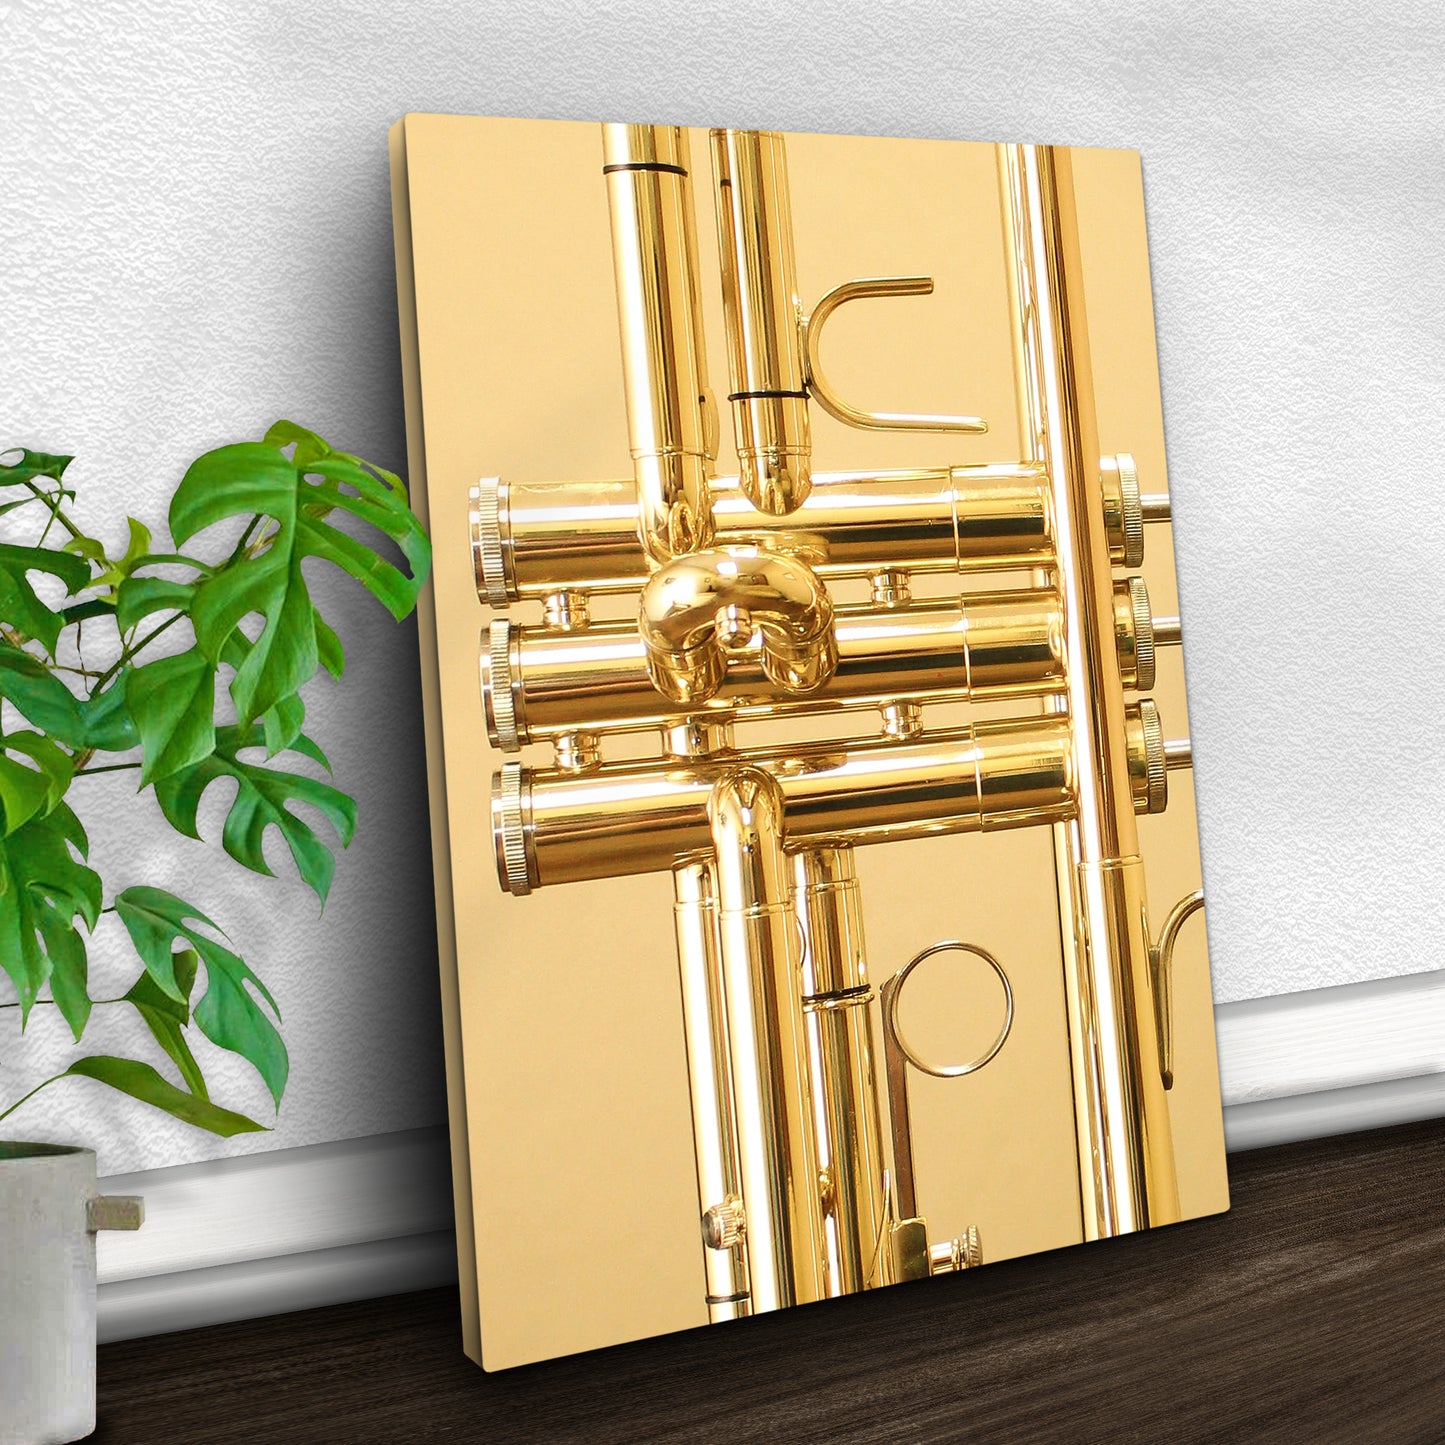 Trumpet Up Close Canvas Wall Art - Image by Tailored Canvases